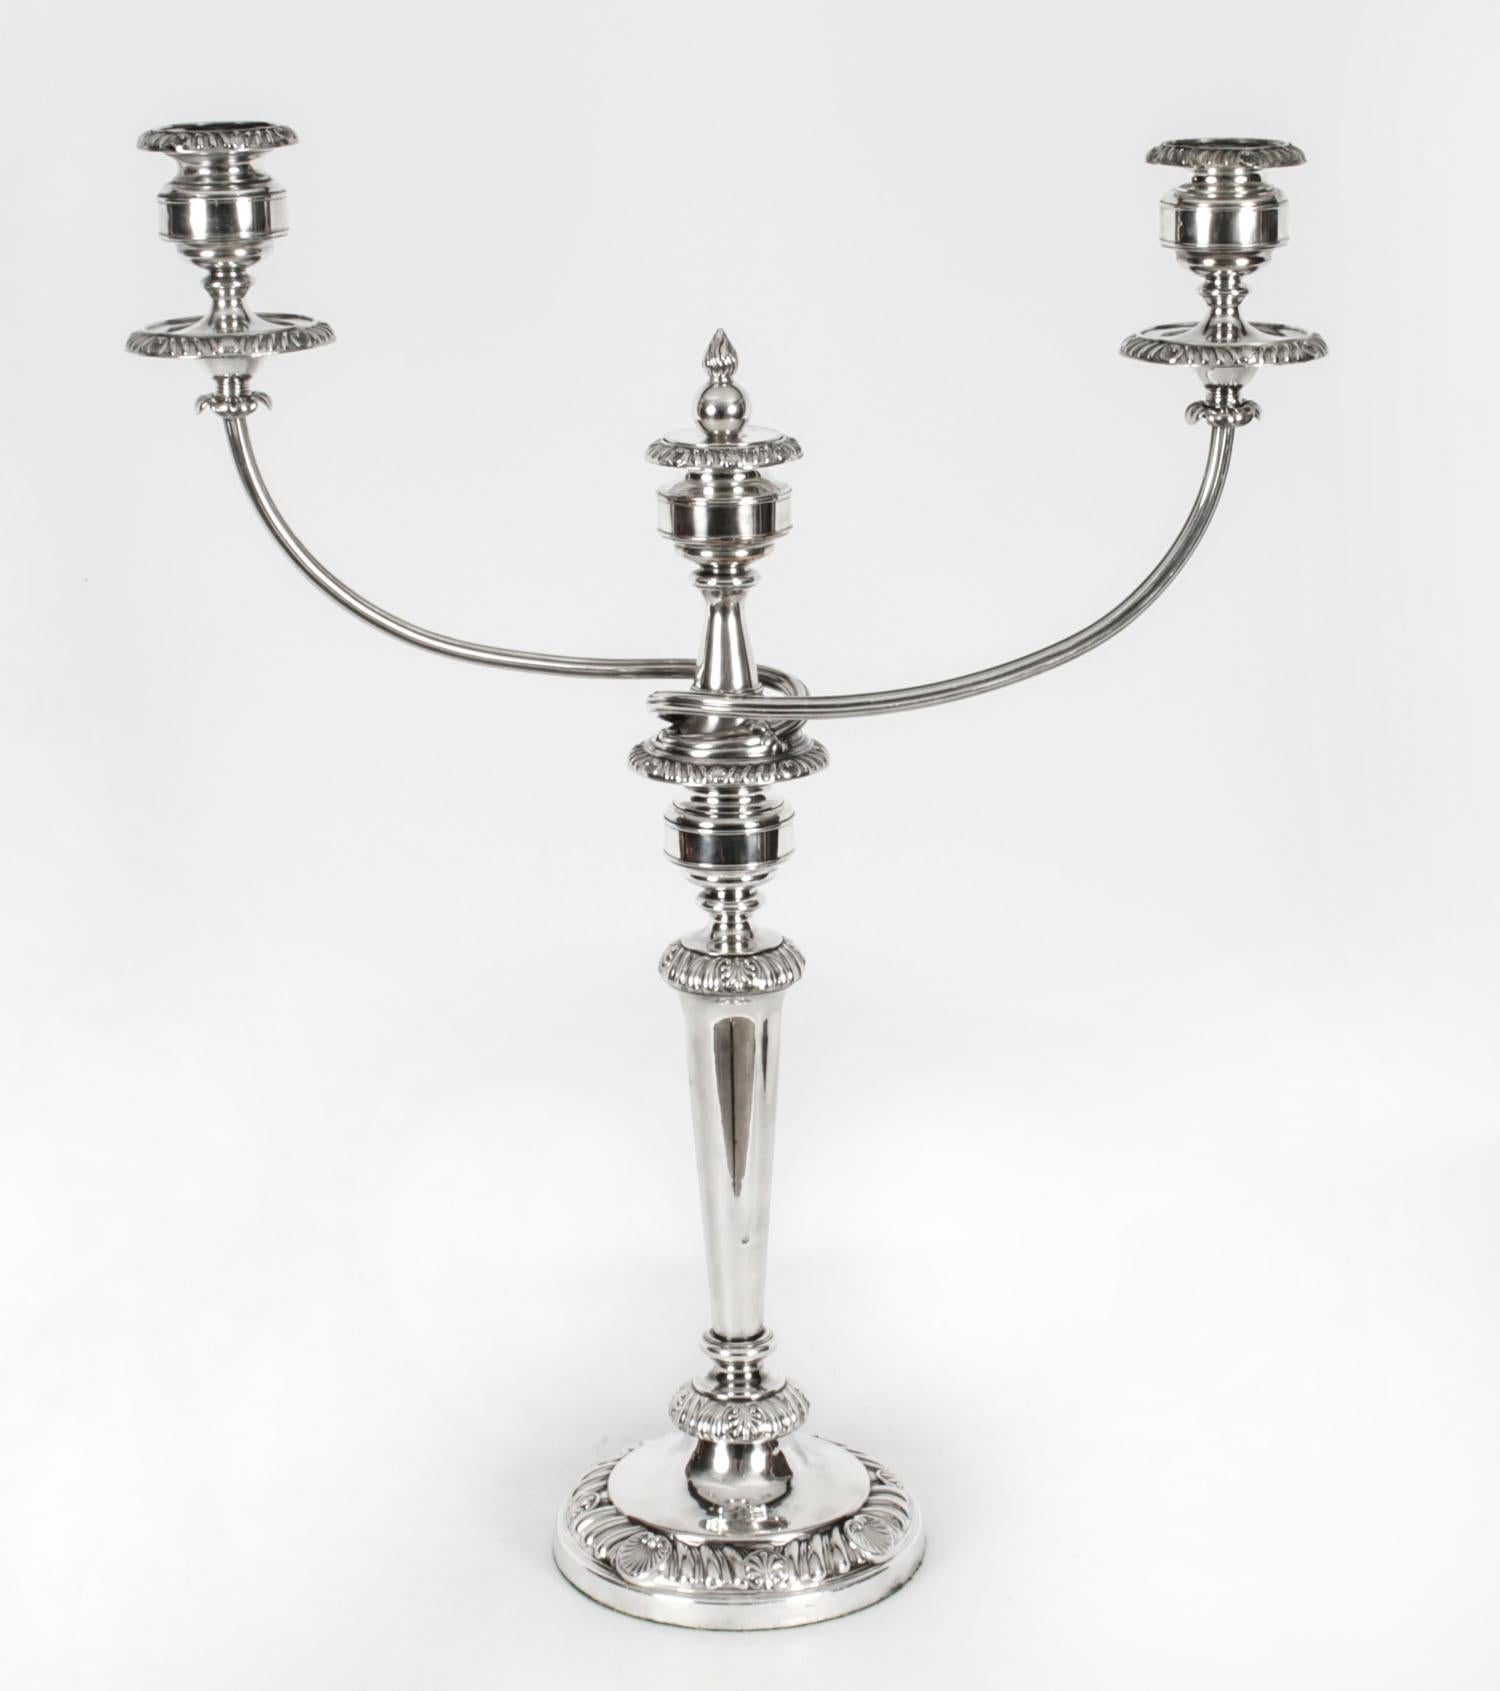 This is a stunning pair of large antique Regency Period Old Sheffield George III silver plated two branch three light table candelabra, circa 1820 in date.
 
The candelabra feature detachable sconces and have beautiful decoration, typical of the